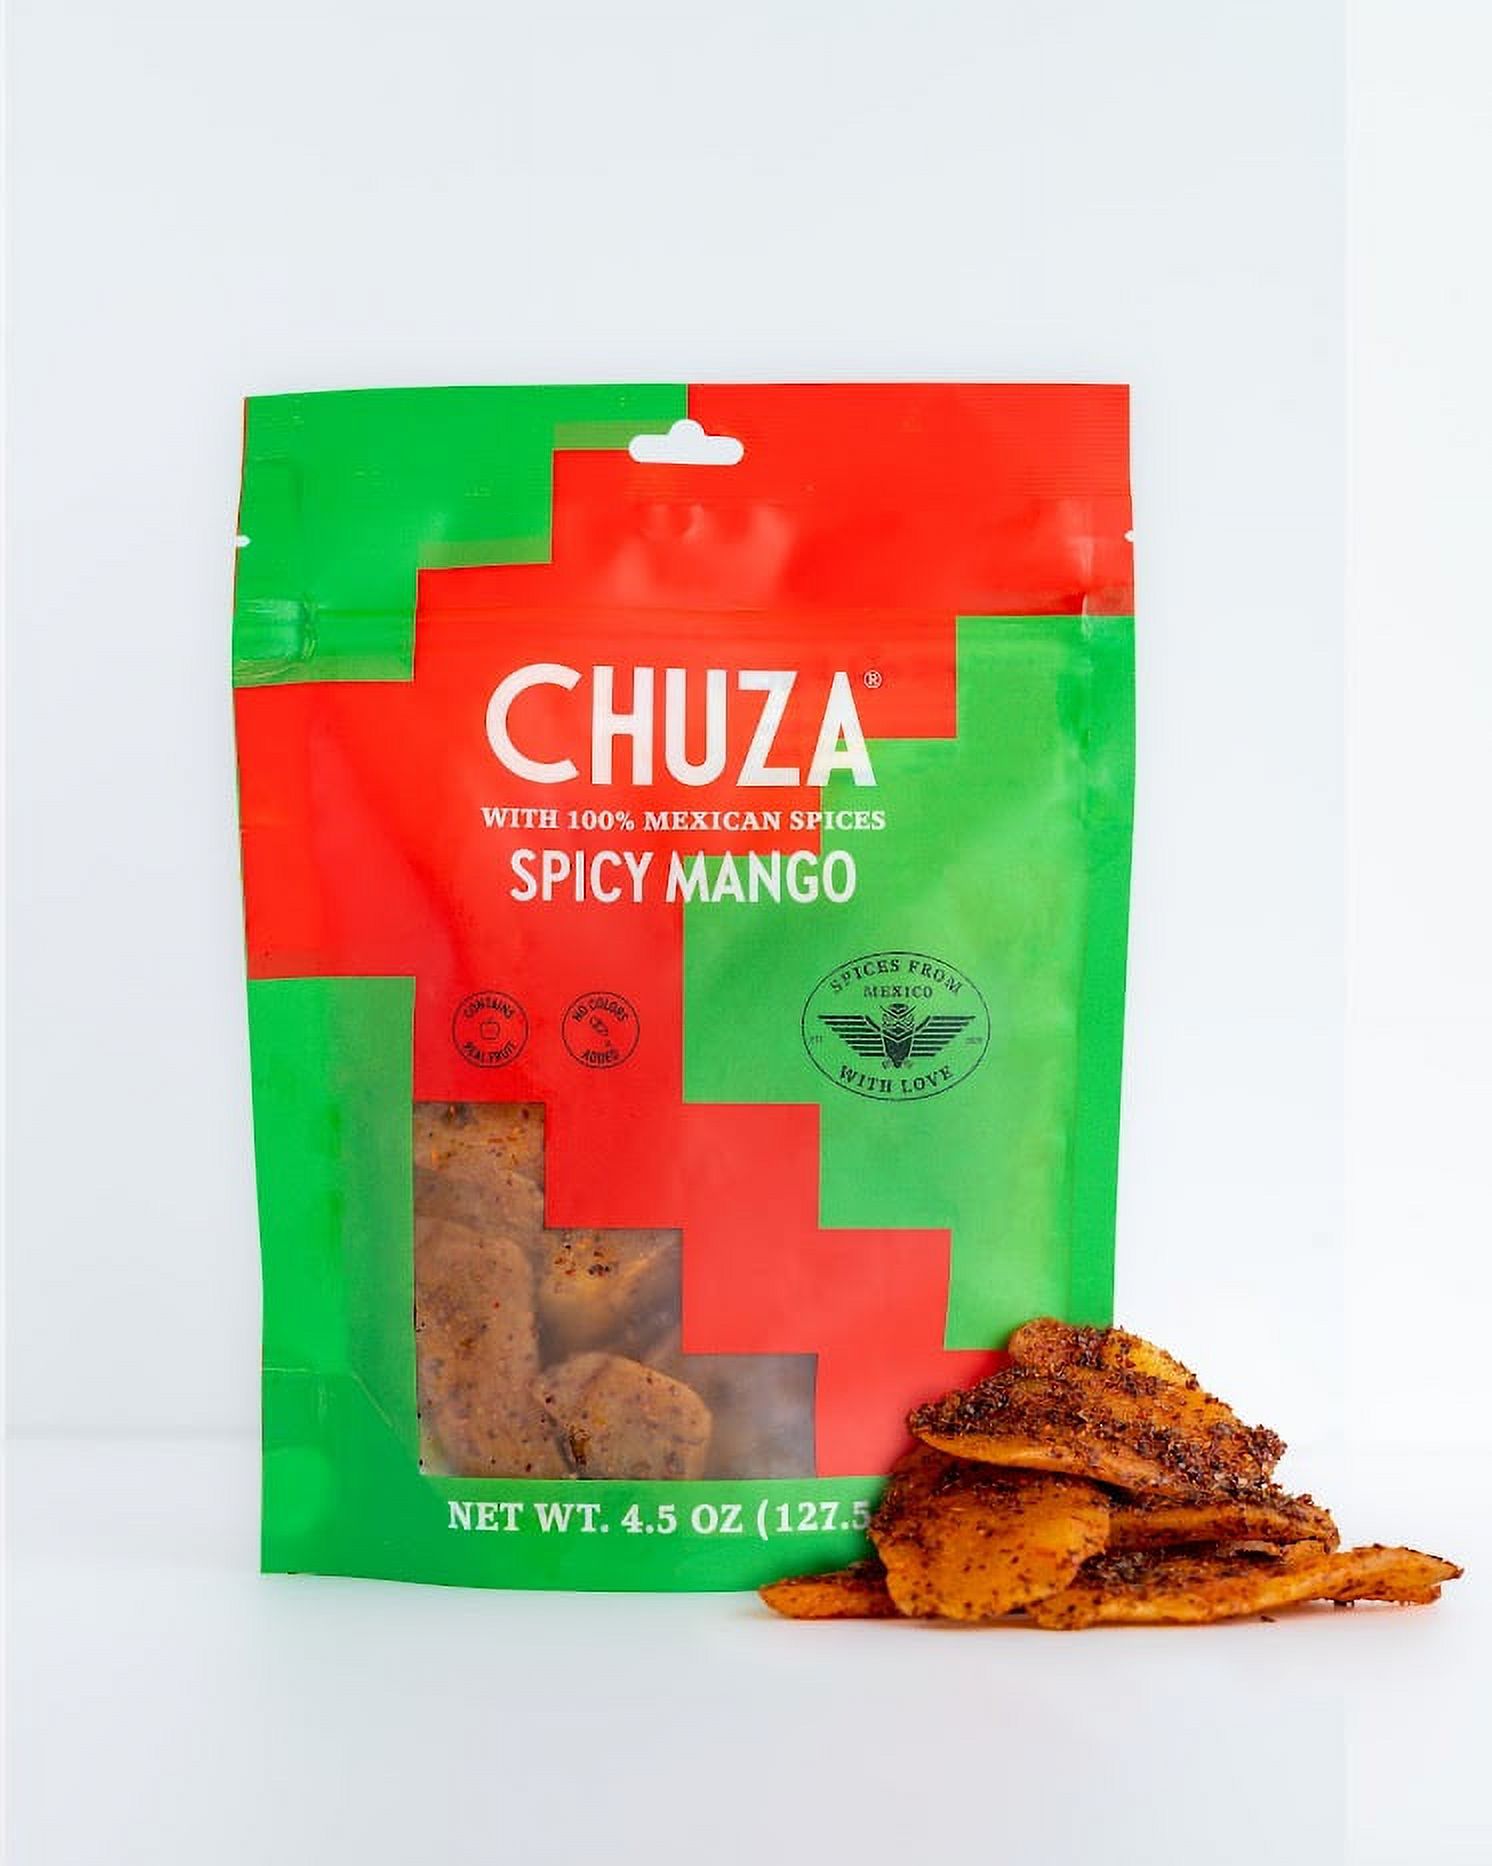 Chuza Dried Mango Mexican Snacks, Dried Fruit Mexican Candy From Mexico w/ 100% Mexican Spices, Value Pack of 3 (4.5oz each) - image 1 of 9